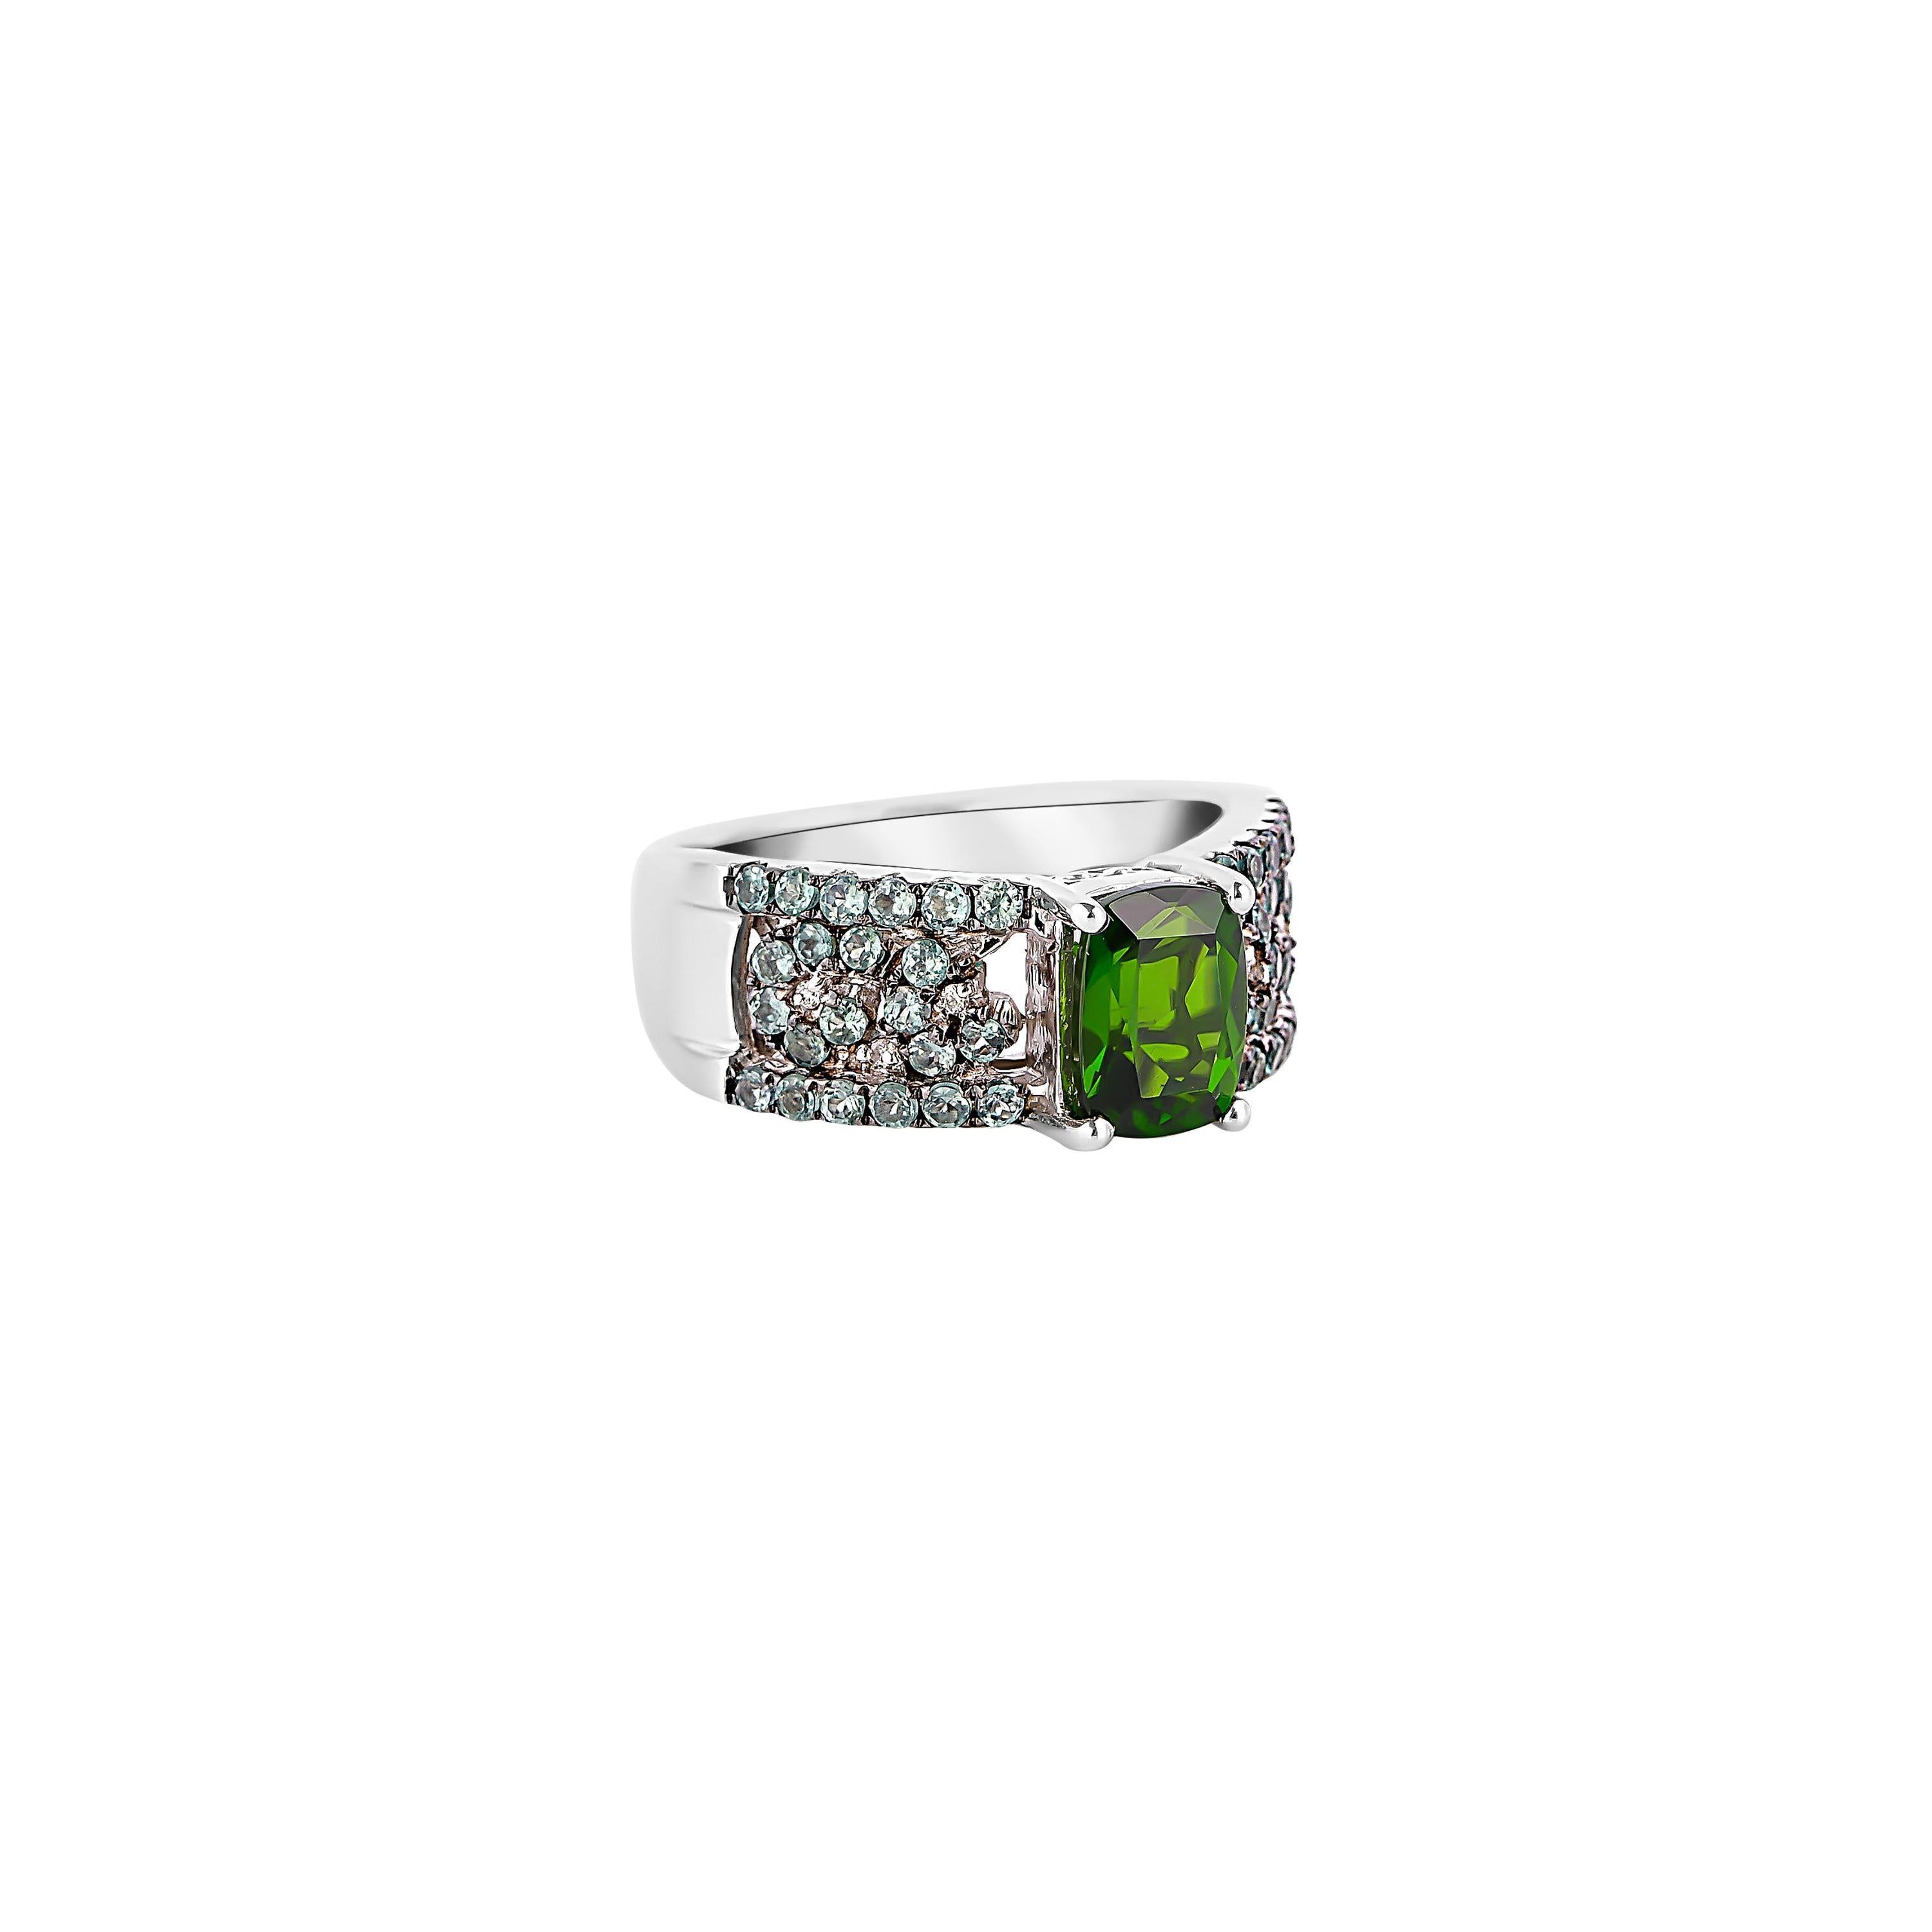 Unique and Designer Cocktail Rings by Sunita Nahata Fine Design.

Classic Chrome Diopside ring in 14K White gold with Alexandrite and Diamonds. 

Chrome Diopside: 1.50 carat, 6X8mm size, Cushion shape.
Alexandrite: 0.704 carat, 1.50mm size, round